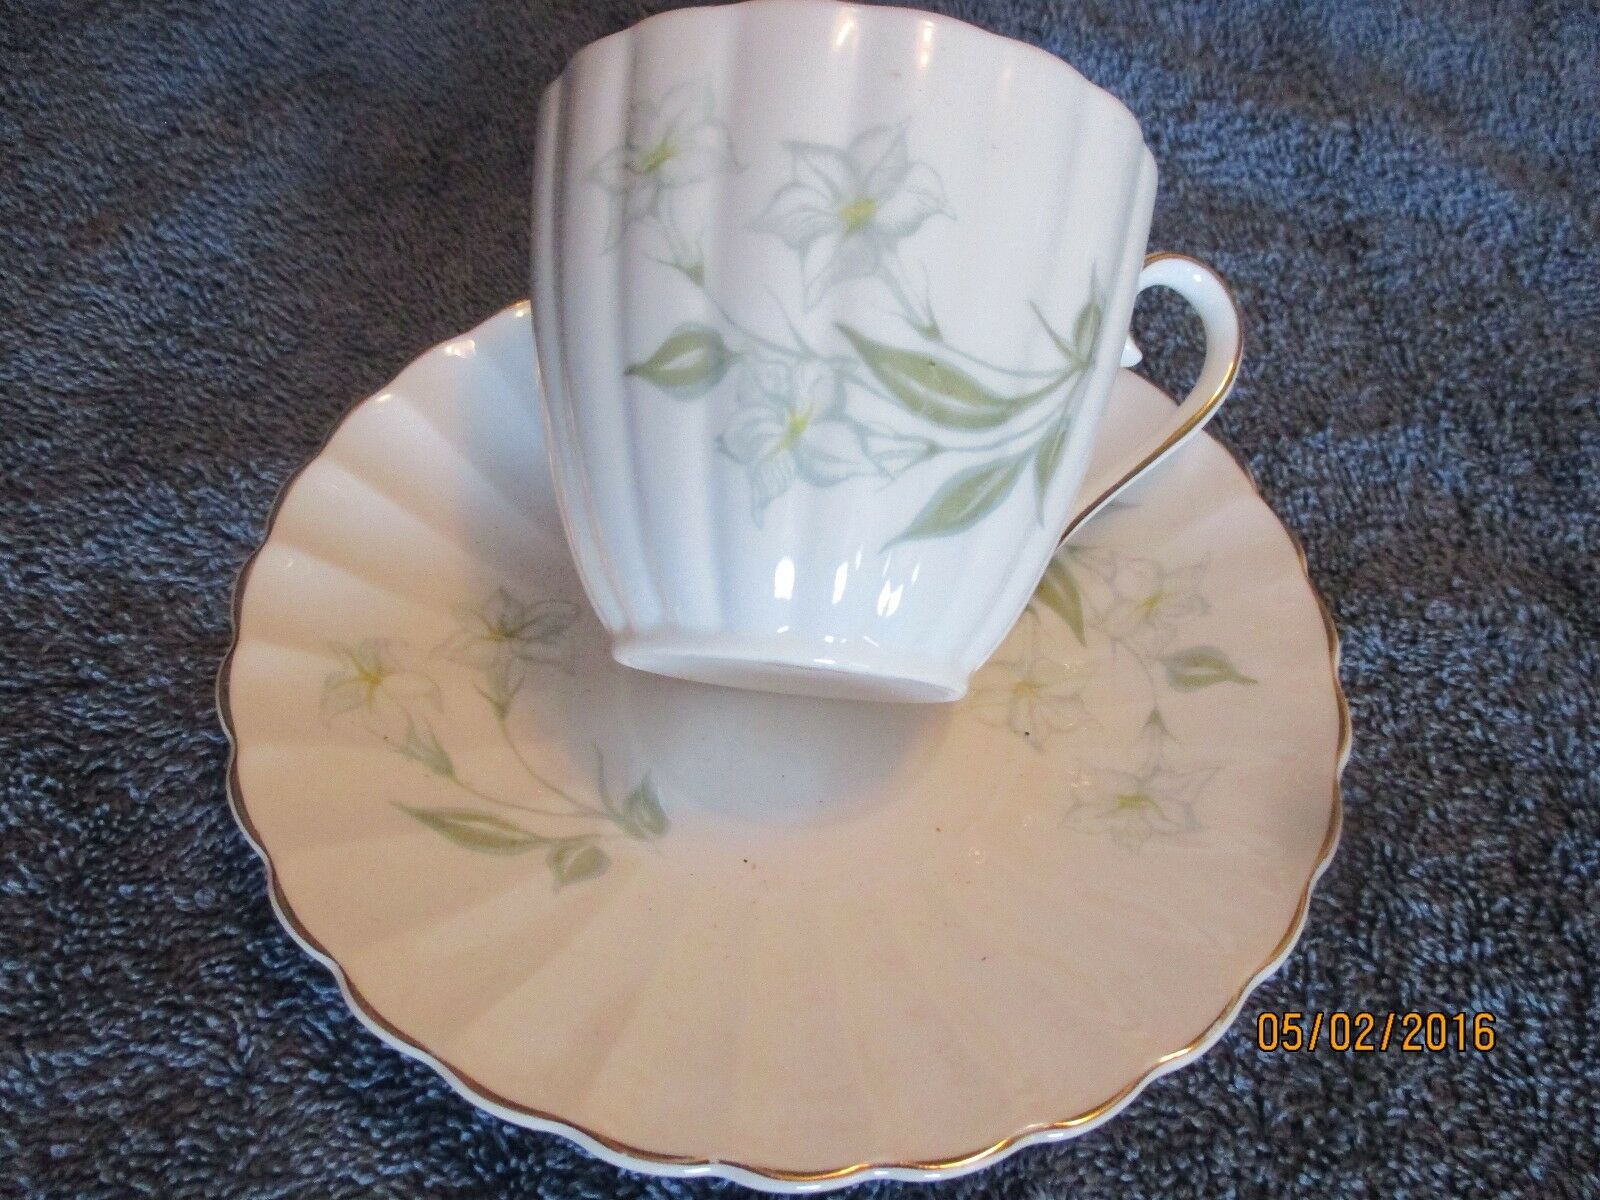 Susie Cooper Lily Cup And Saucer Bone China Blue Inside Cup Unusual !